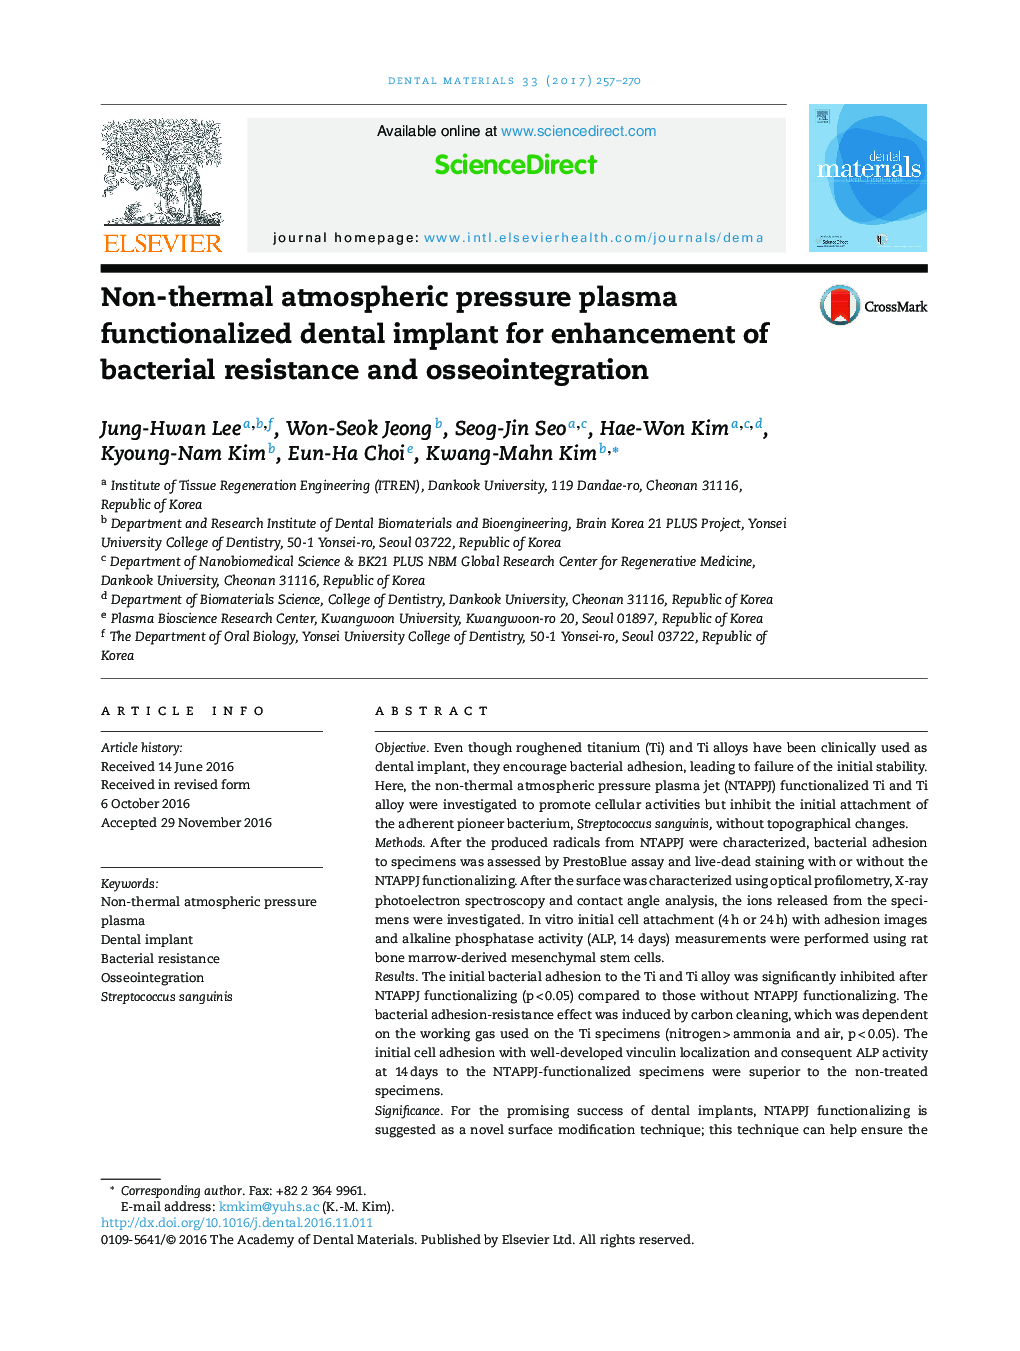 Non-thermal atmospheric pressure plasma functionalized dental implant for enhancement of bacterial resistance and osseointegration